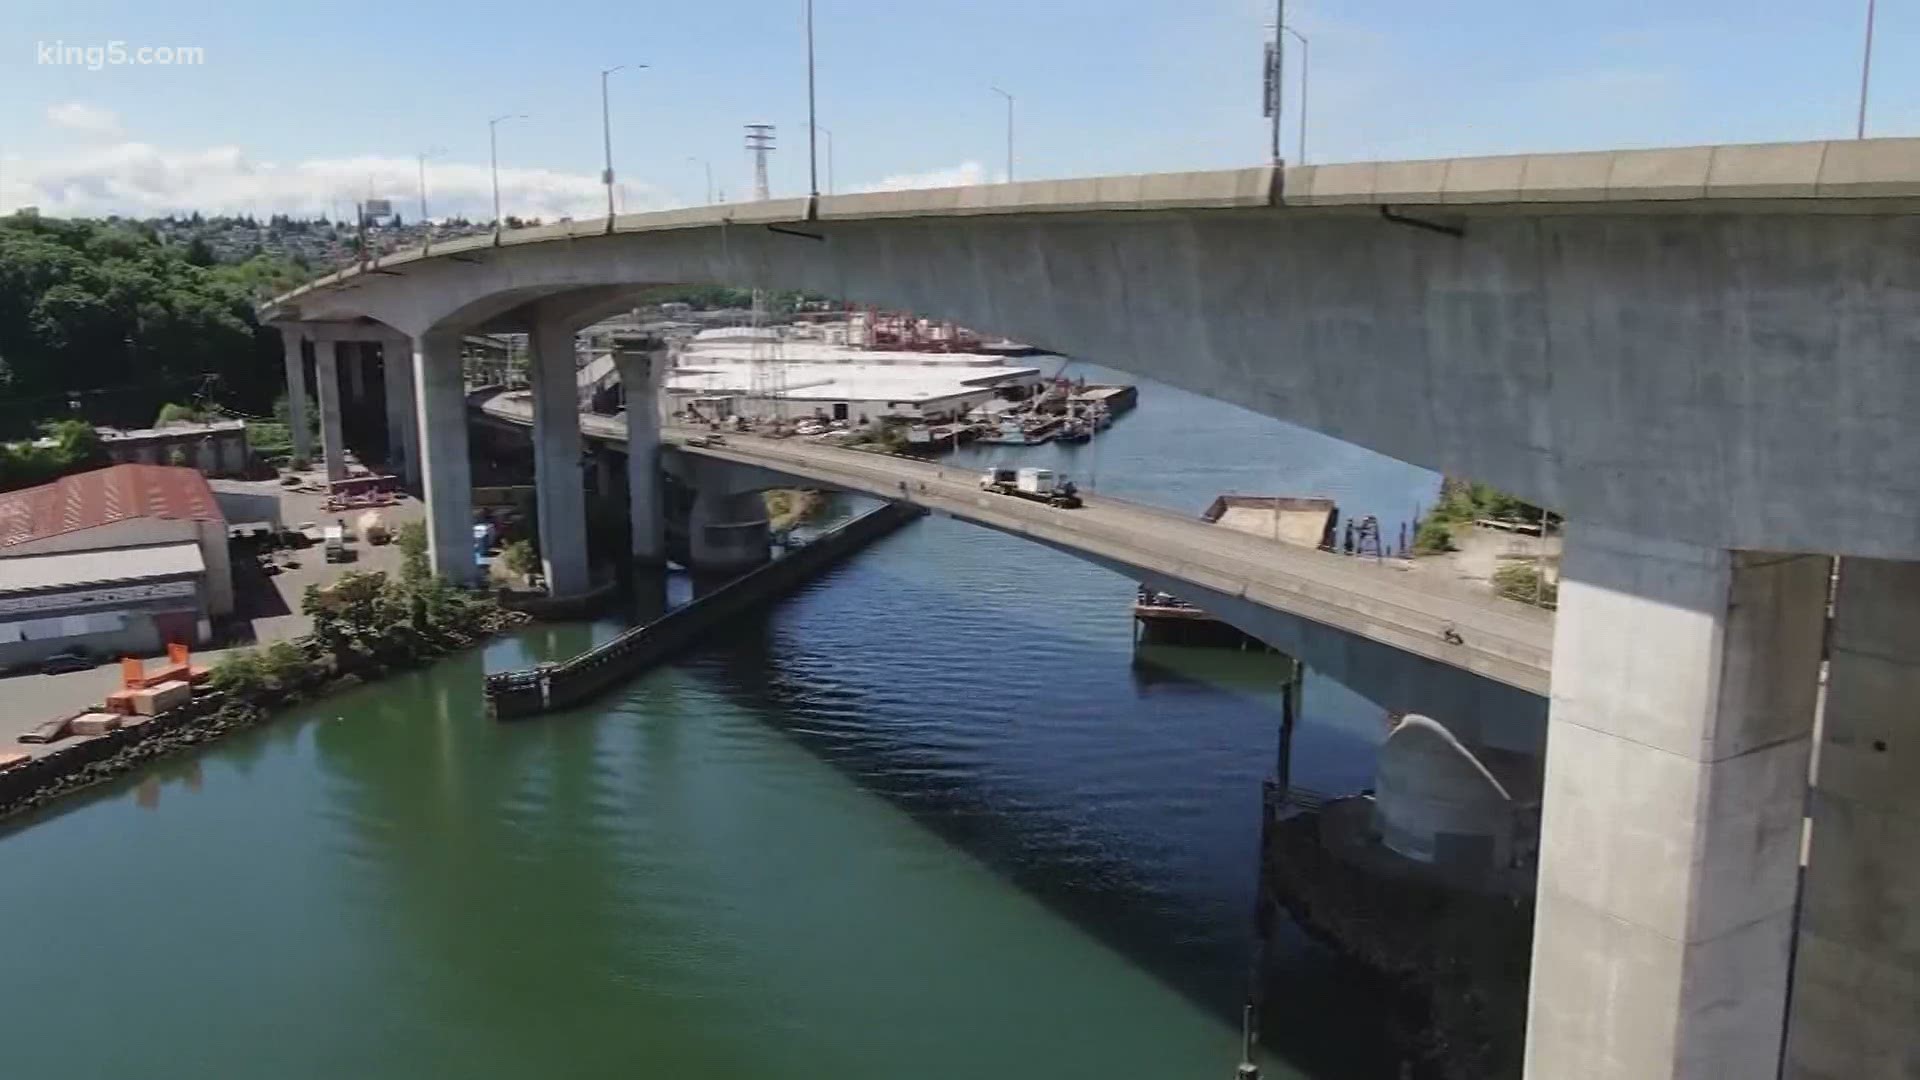 A new report says Seattle is not spending enough on the upkeep and maintenance of its bridges, and many of those crossings are in worsening condition.